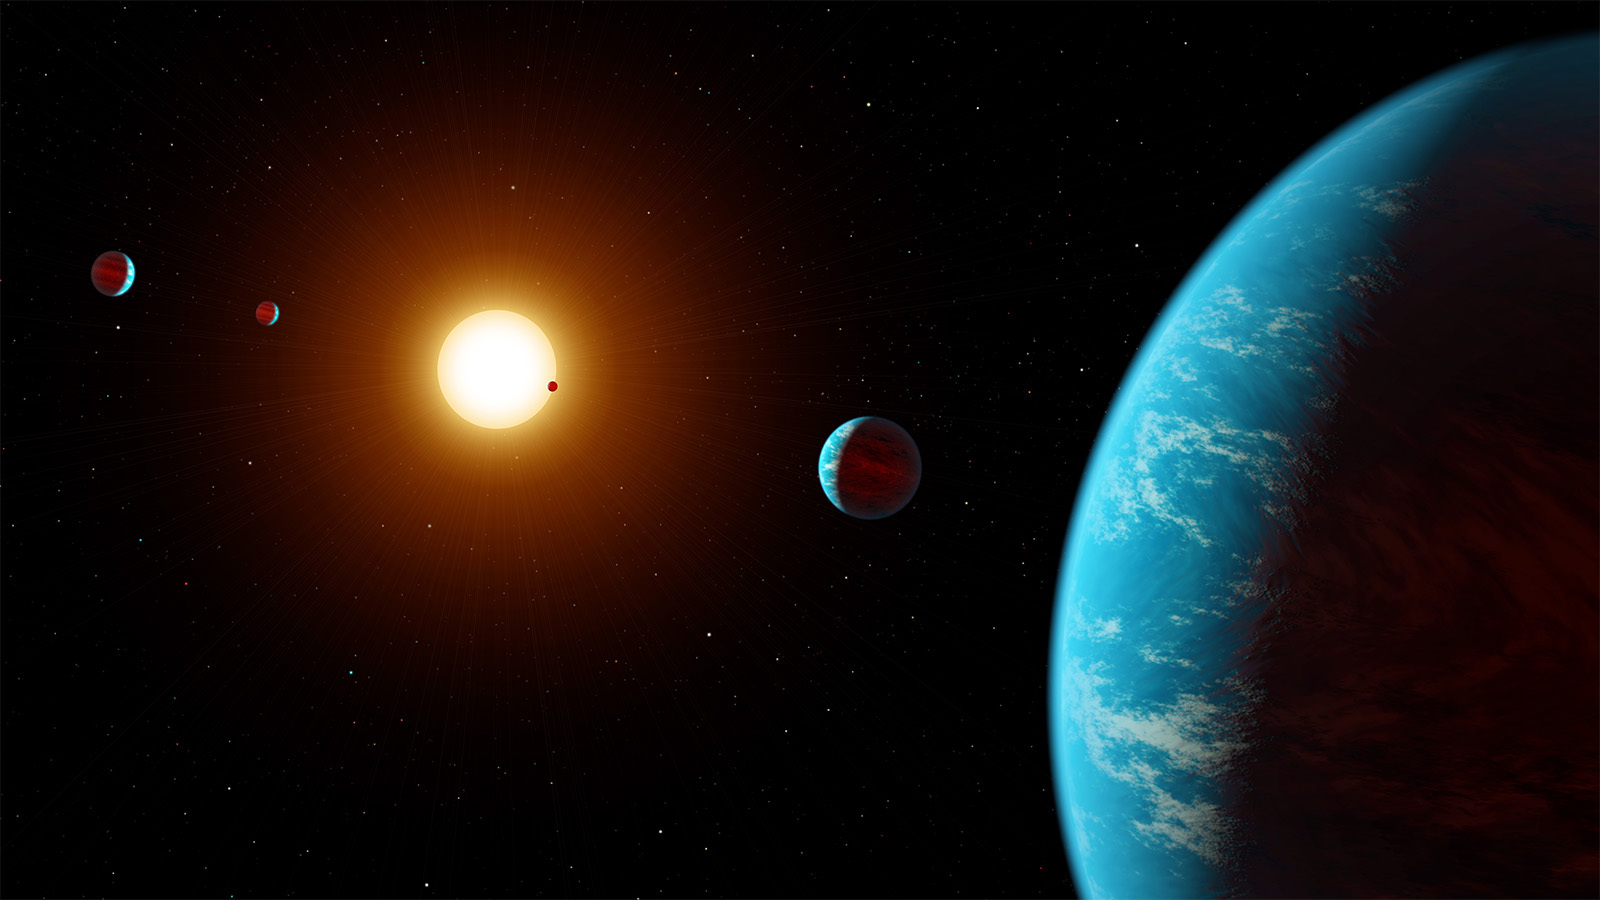 Illustration of the multi-planet system.